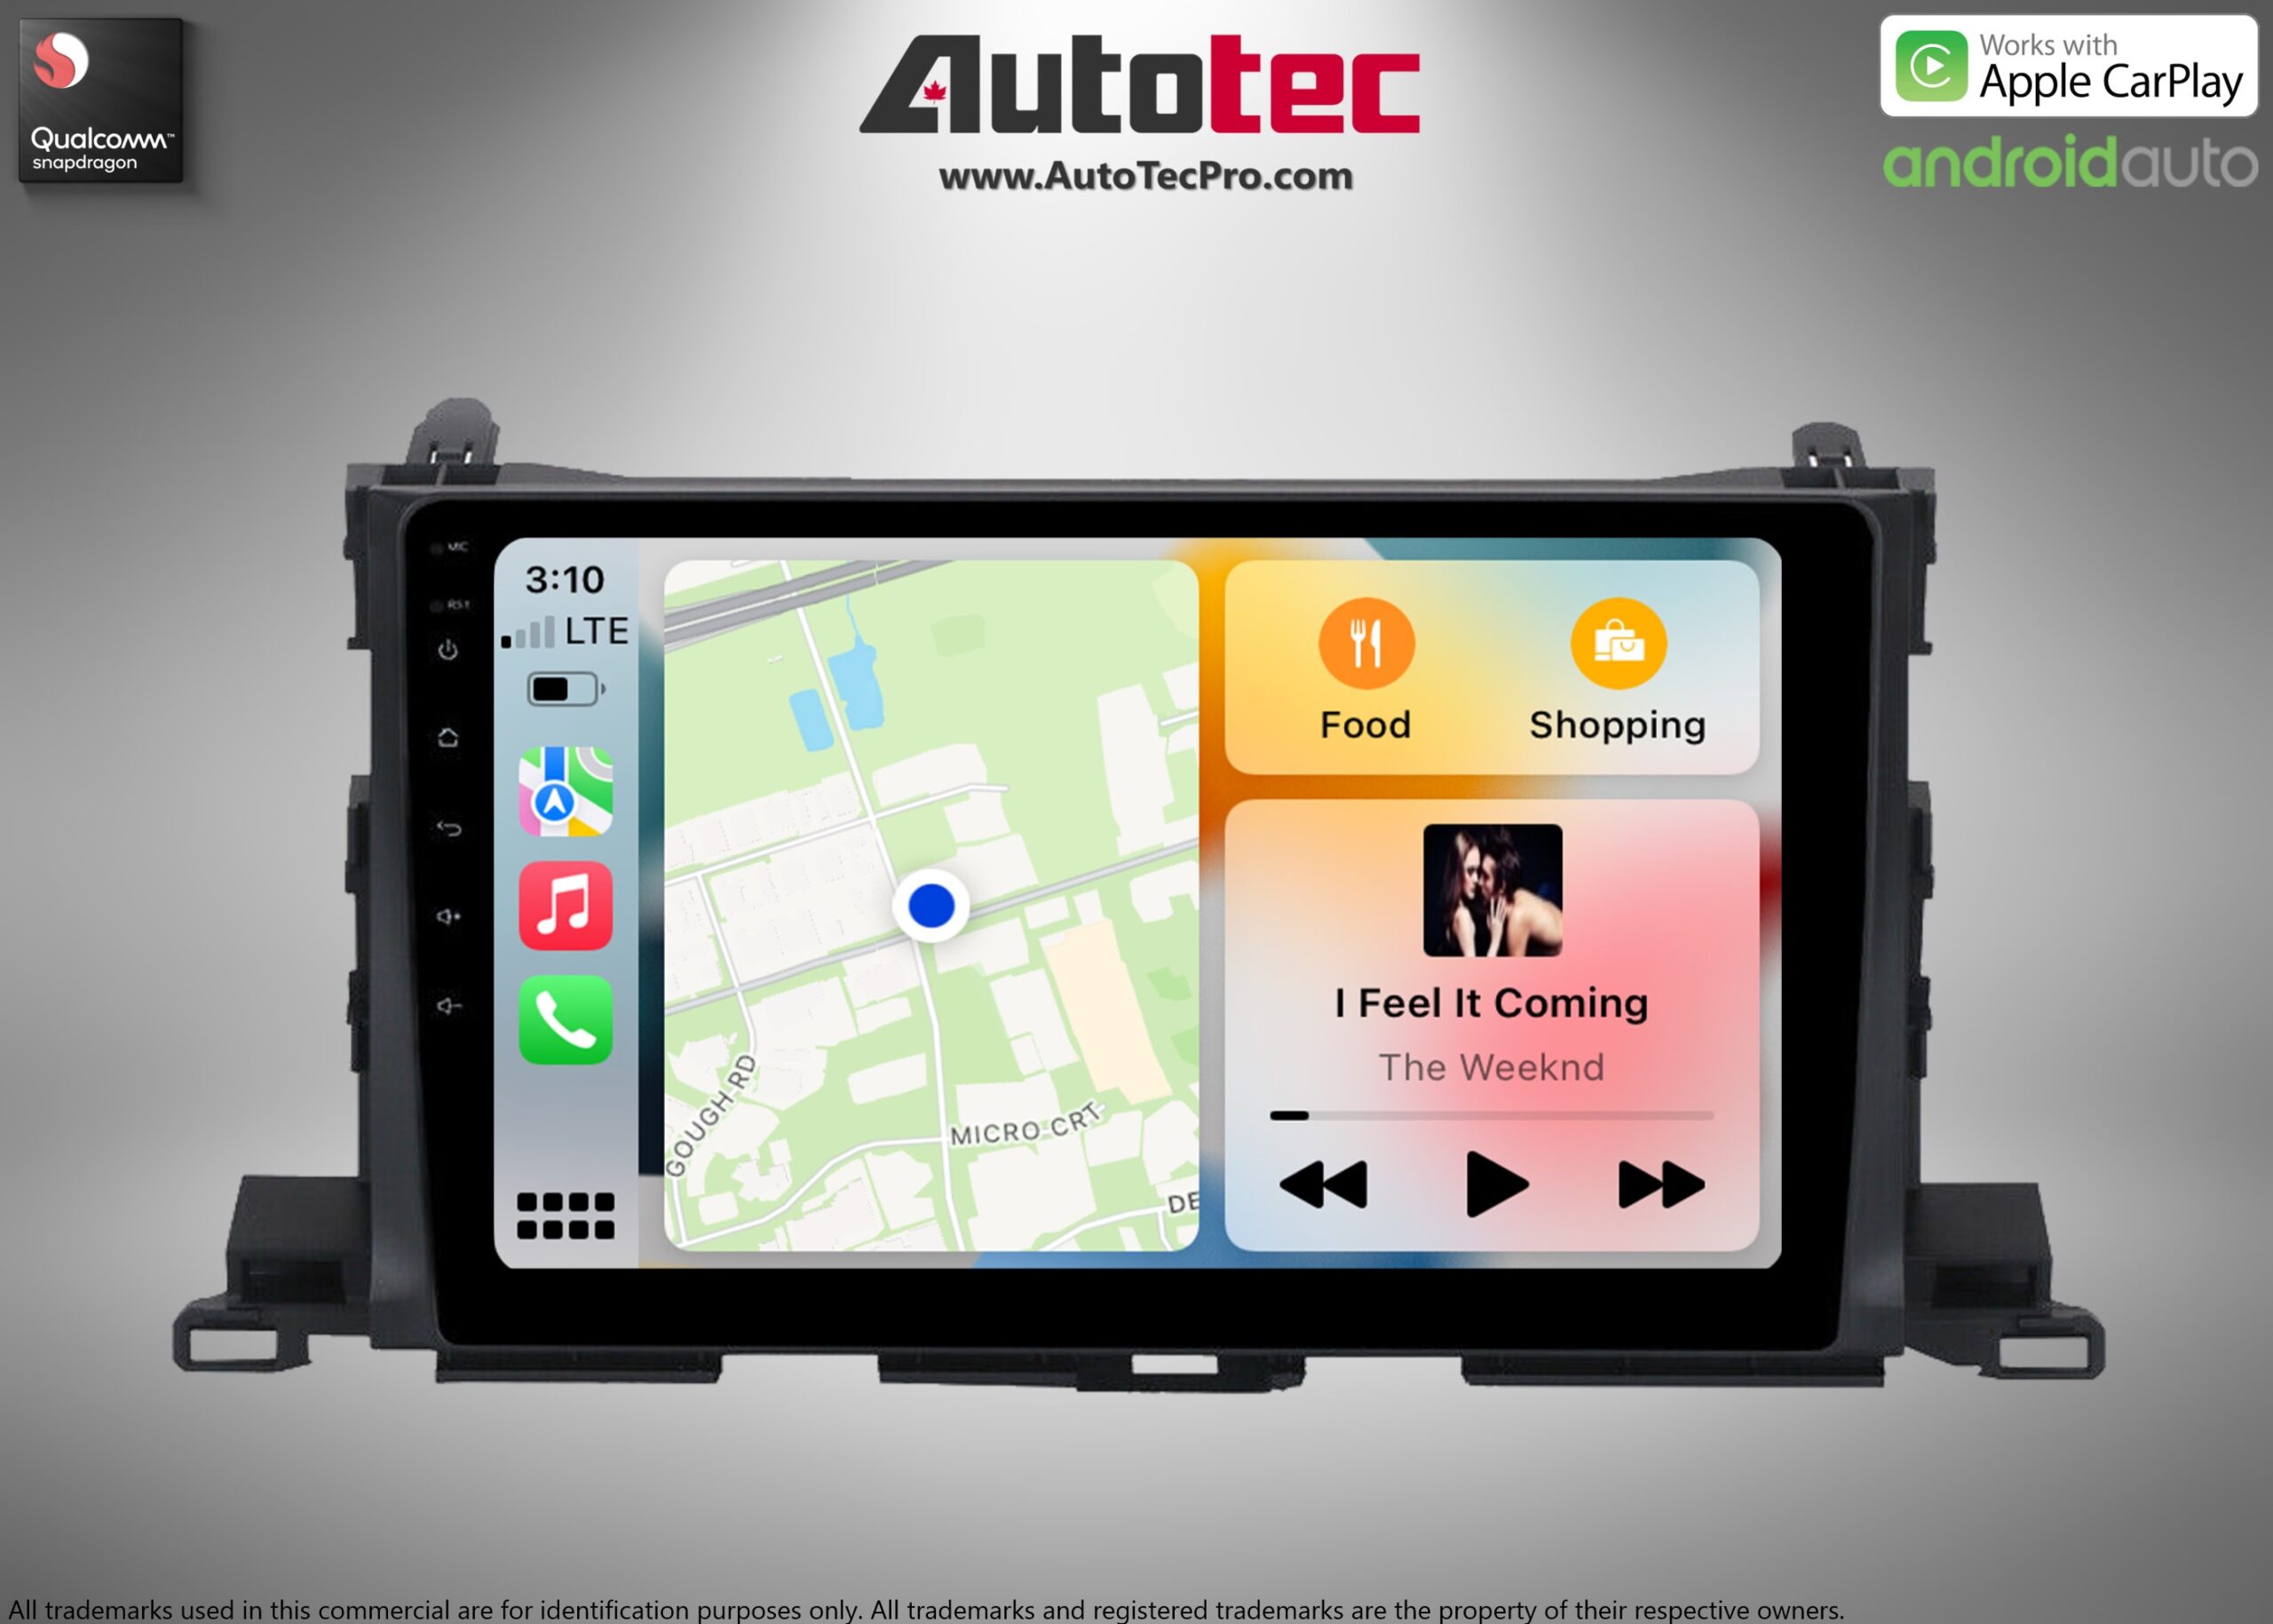 Toyota Highlander (2014 – 2019) 10.2″ HD Touch-Screen Android Navigation System | Android 13 | GPS | BT | WiFi | Camera | CarPlay